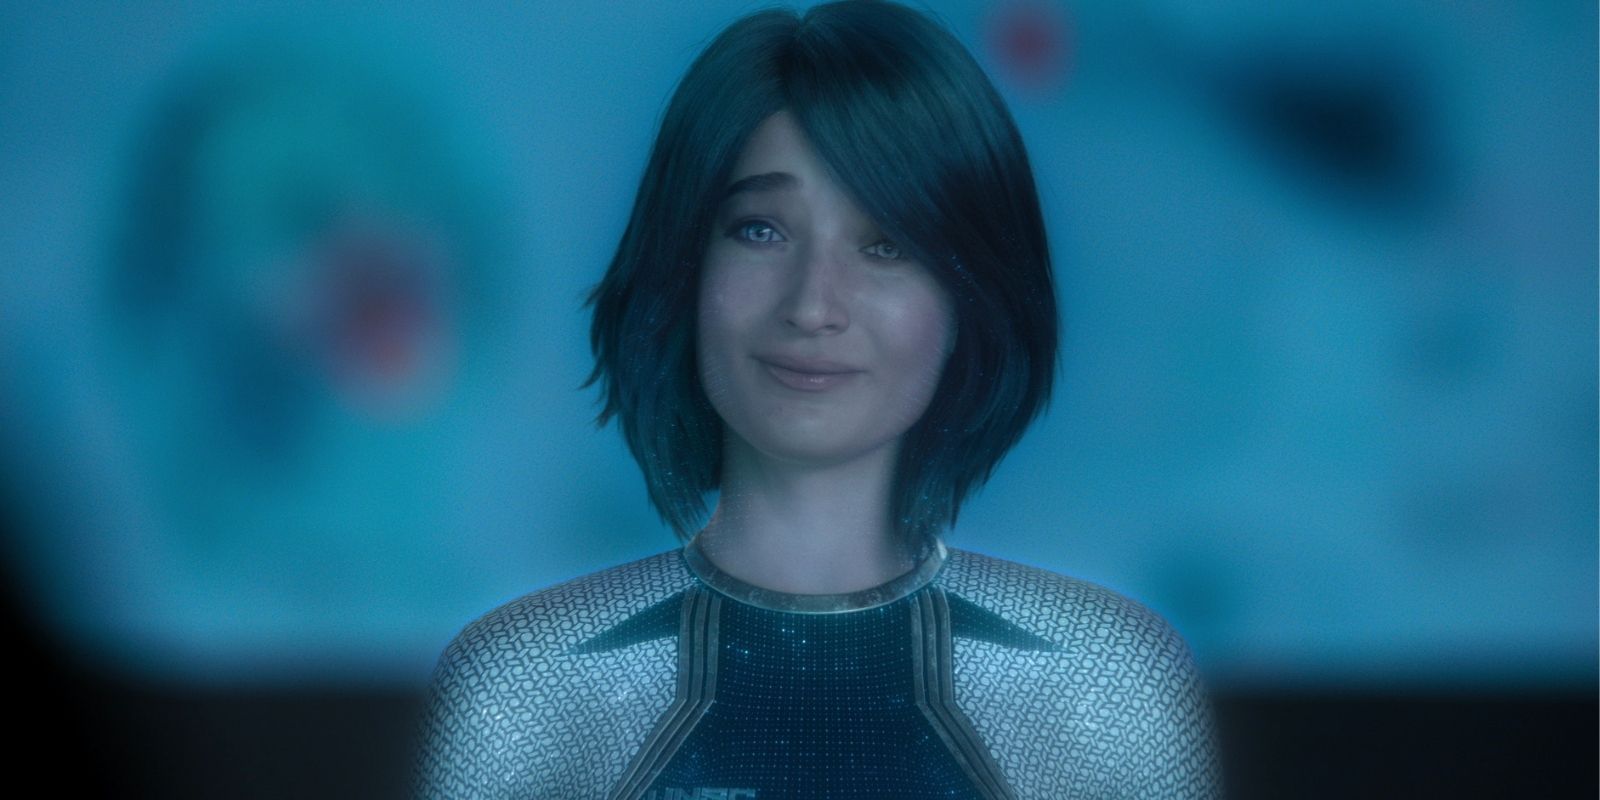 Cortana in Paramount's live-action Halo series